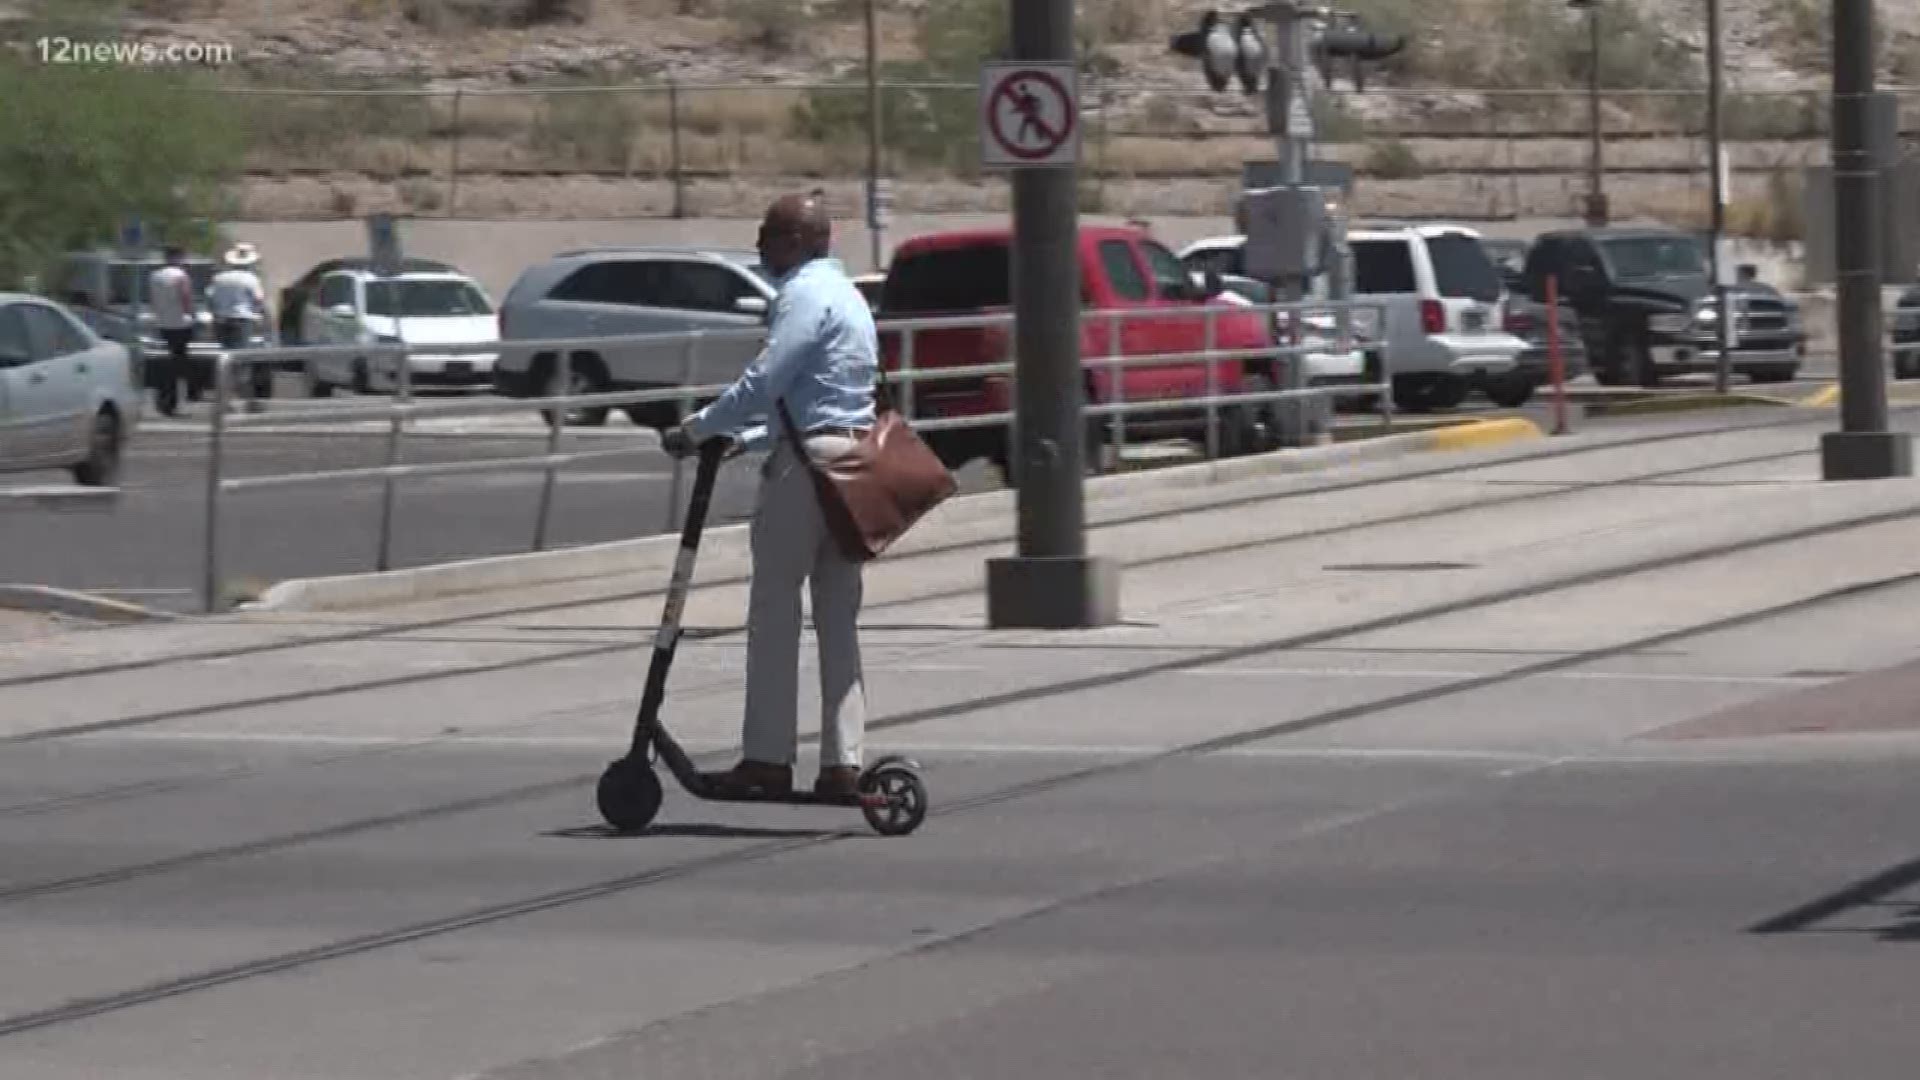 Tempe has just approved new rules that give more guidance on how scooters and bikes should navigate the city streets and sidewalks.